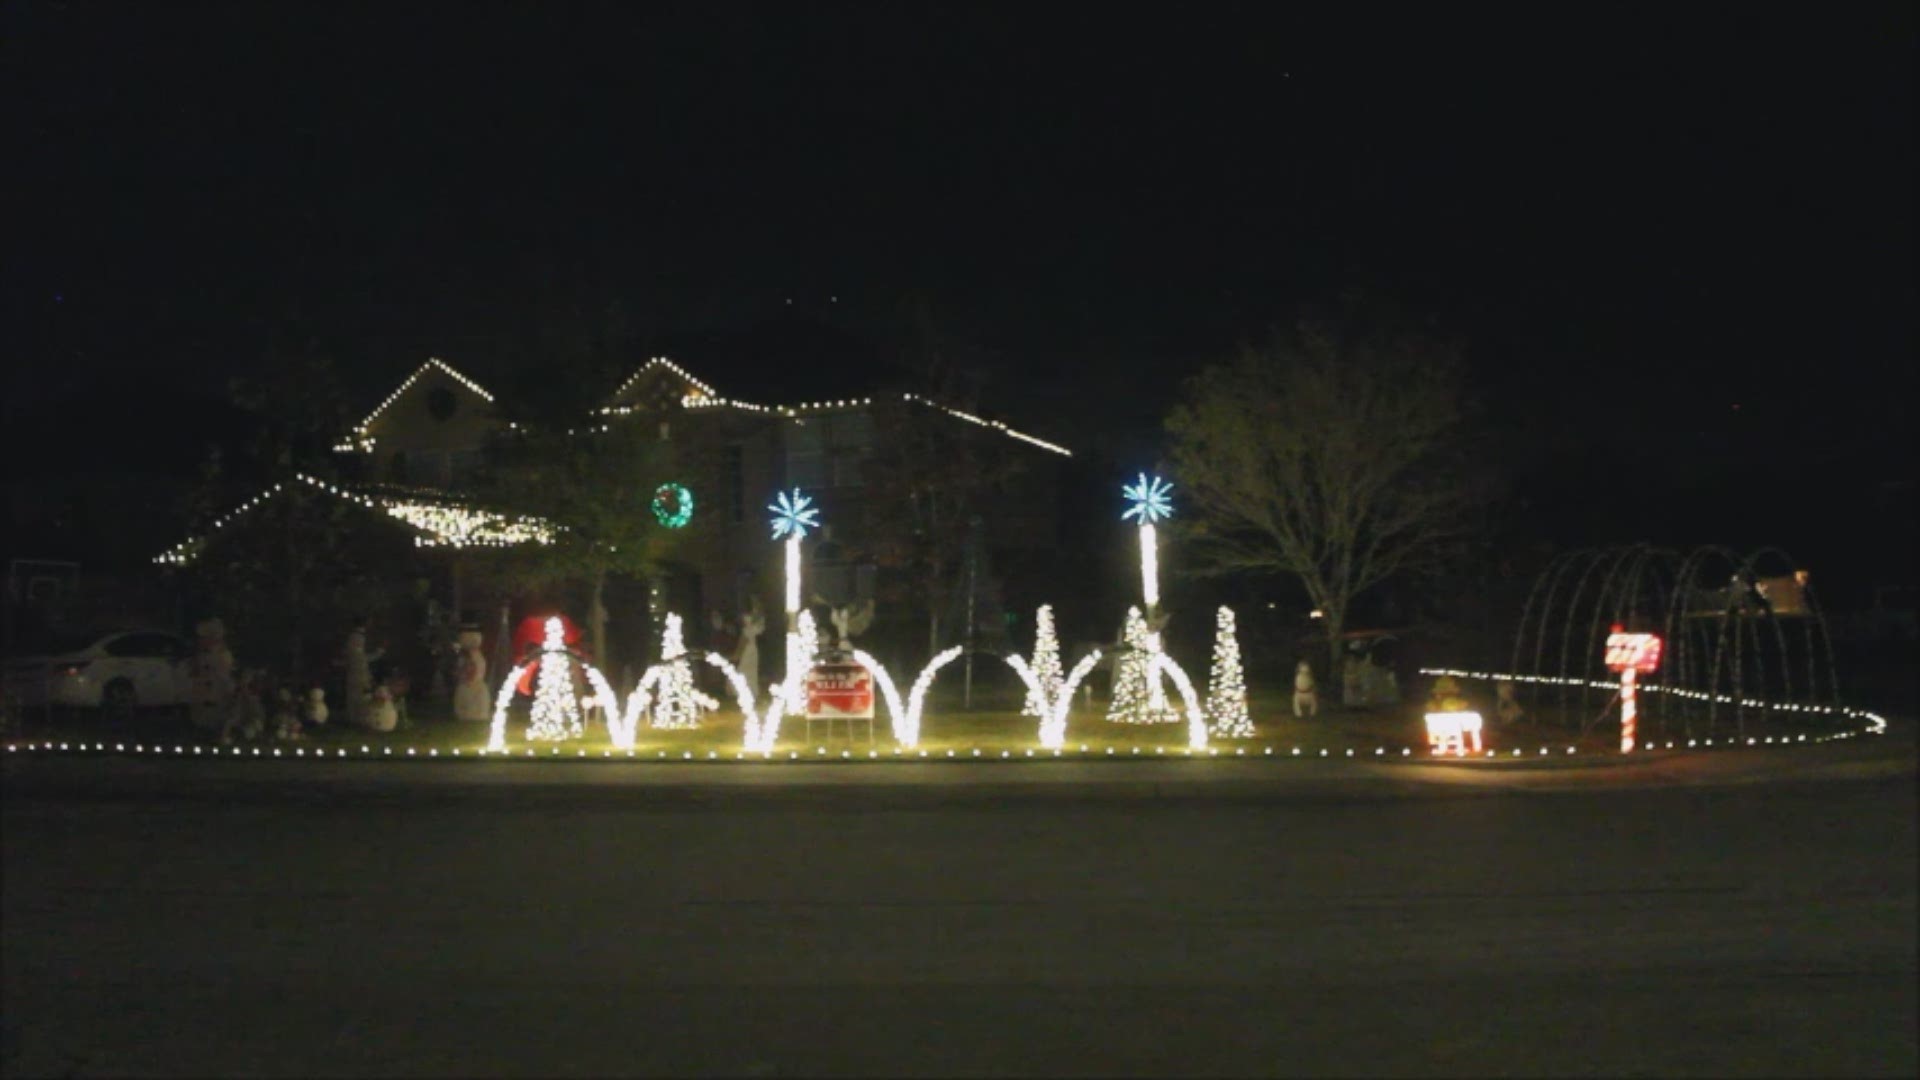 Crossing the Marigold Bridge song from Coco Christmas Lights Show in Boerne, Tx.